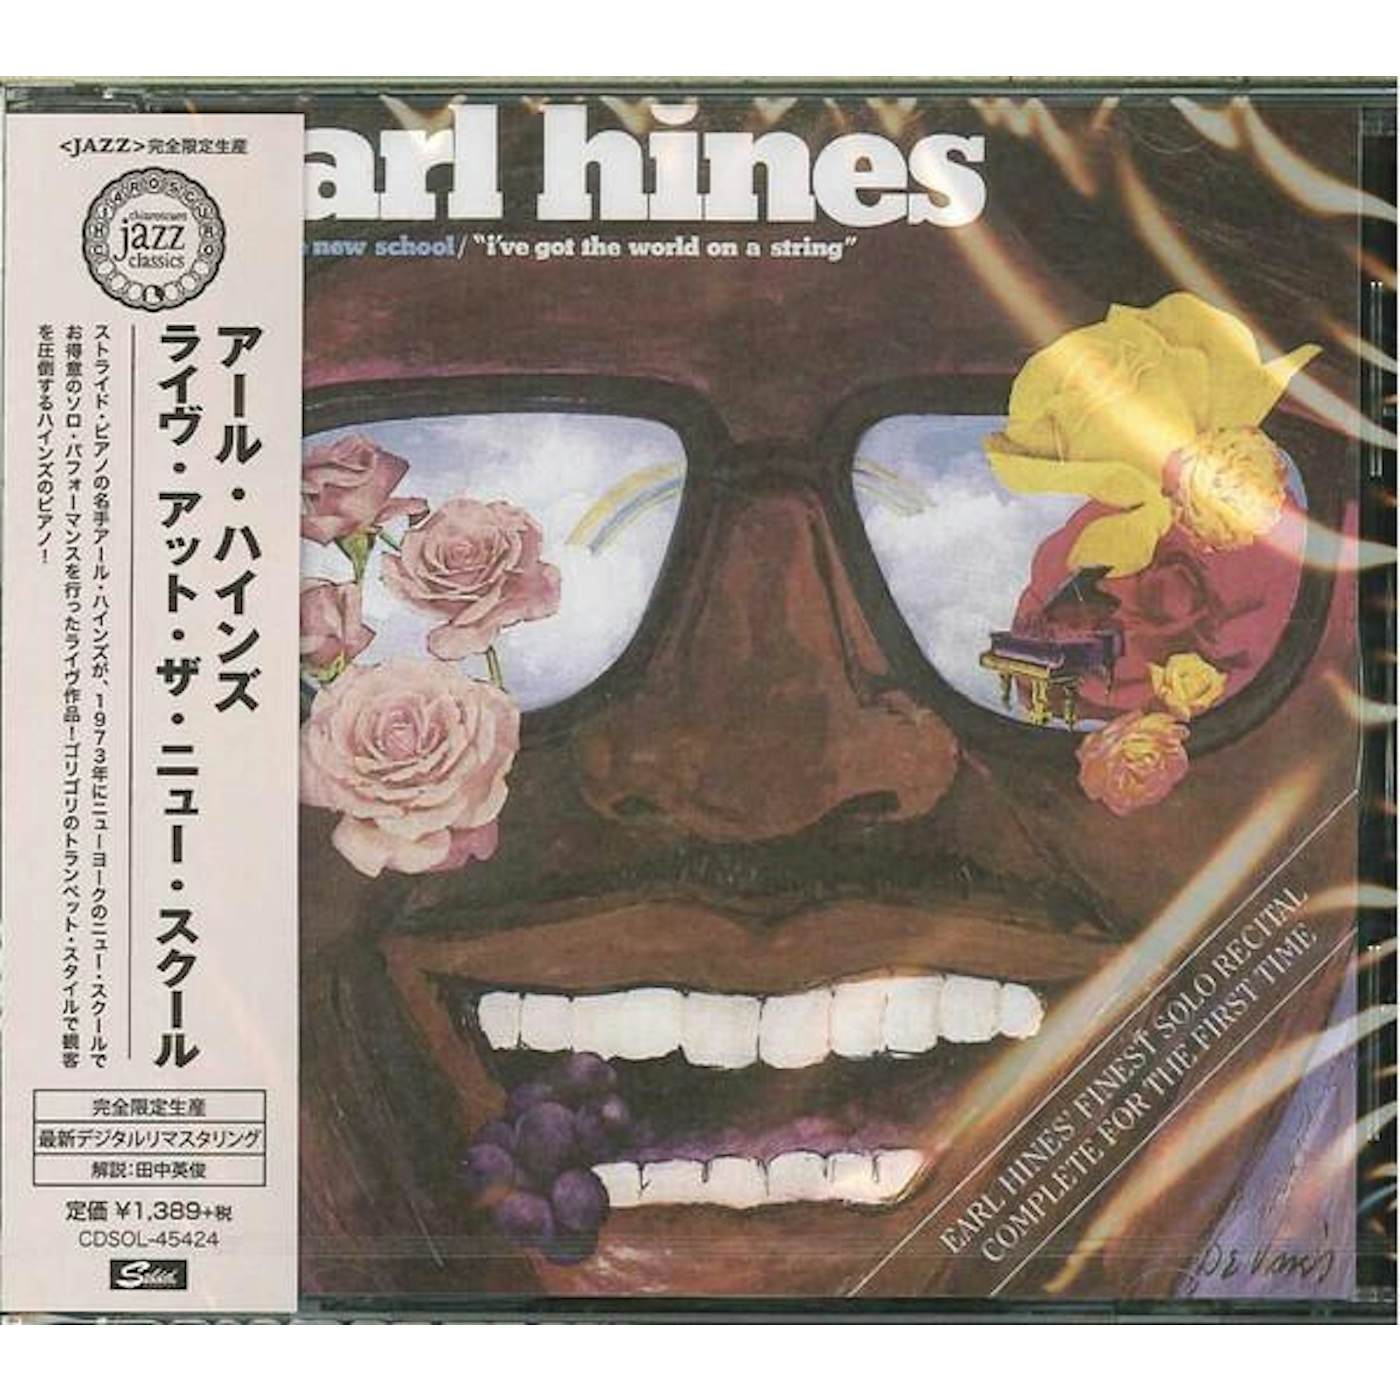 Earl Hines LIVE AT THE NEW SCHOOL (LIMITED REMASTER) CD